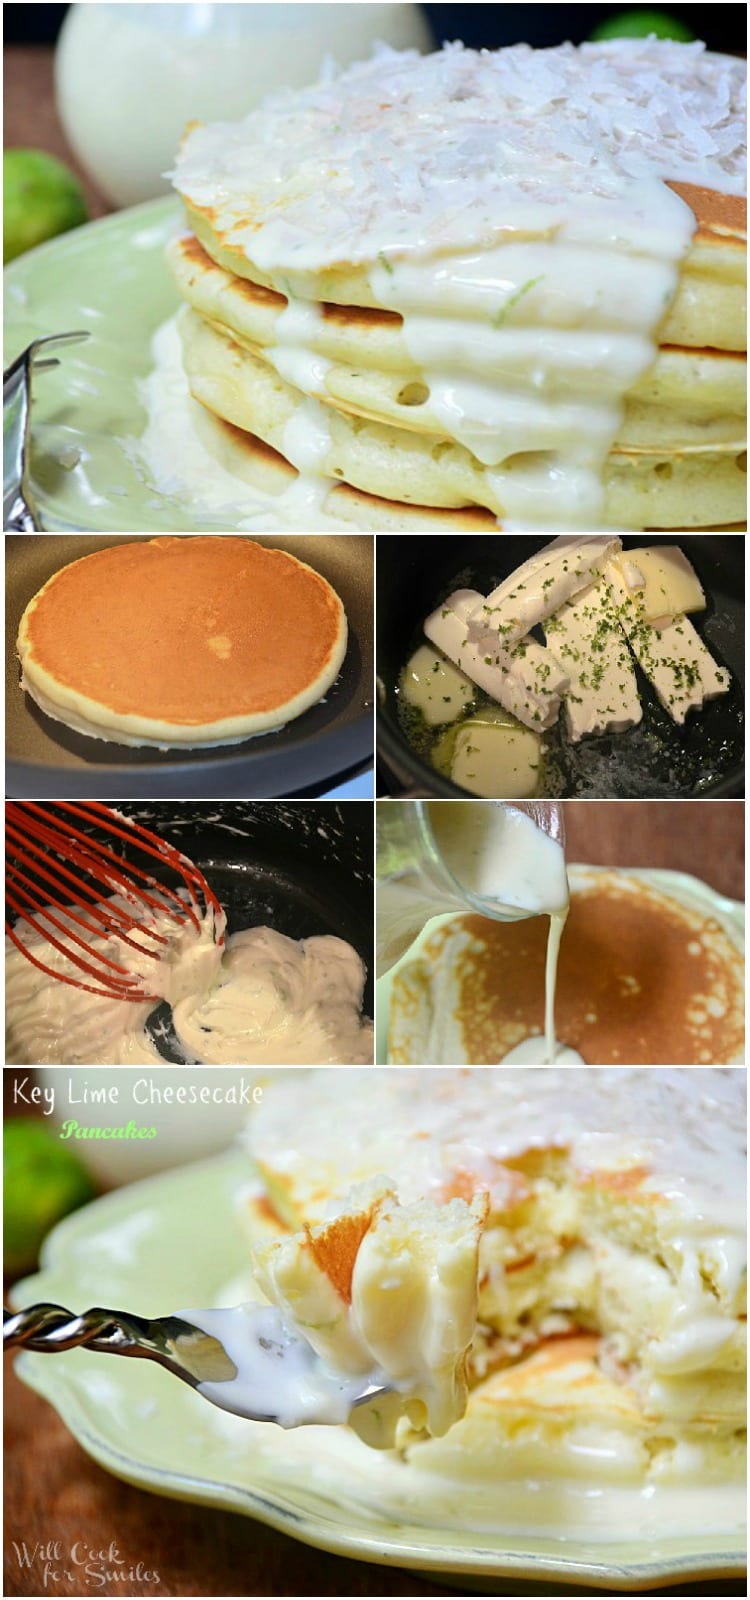 Key Lime Cheesecake Pancakes are made with soft buttermilk pancakes infused with key limes and topped with a simple homemade key lime cheesecake sauce. #pancakes #keylime #sauce #topping #coconut #buttermilkpancakes